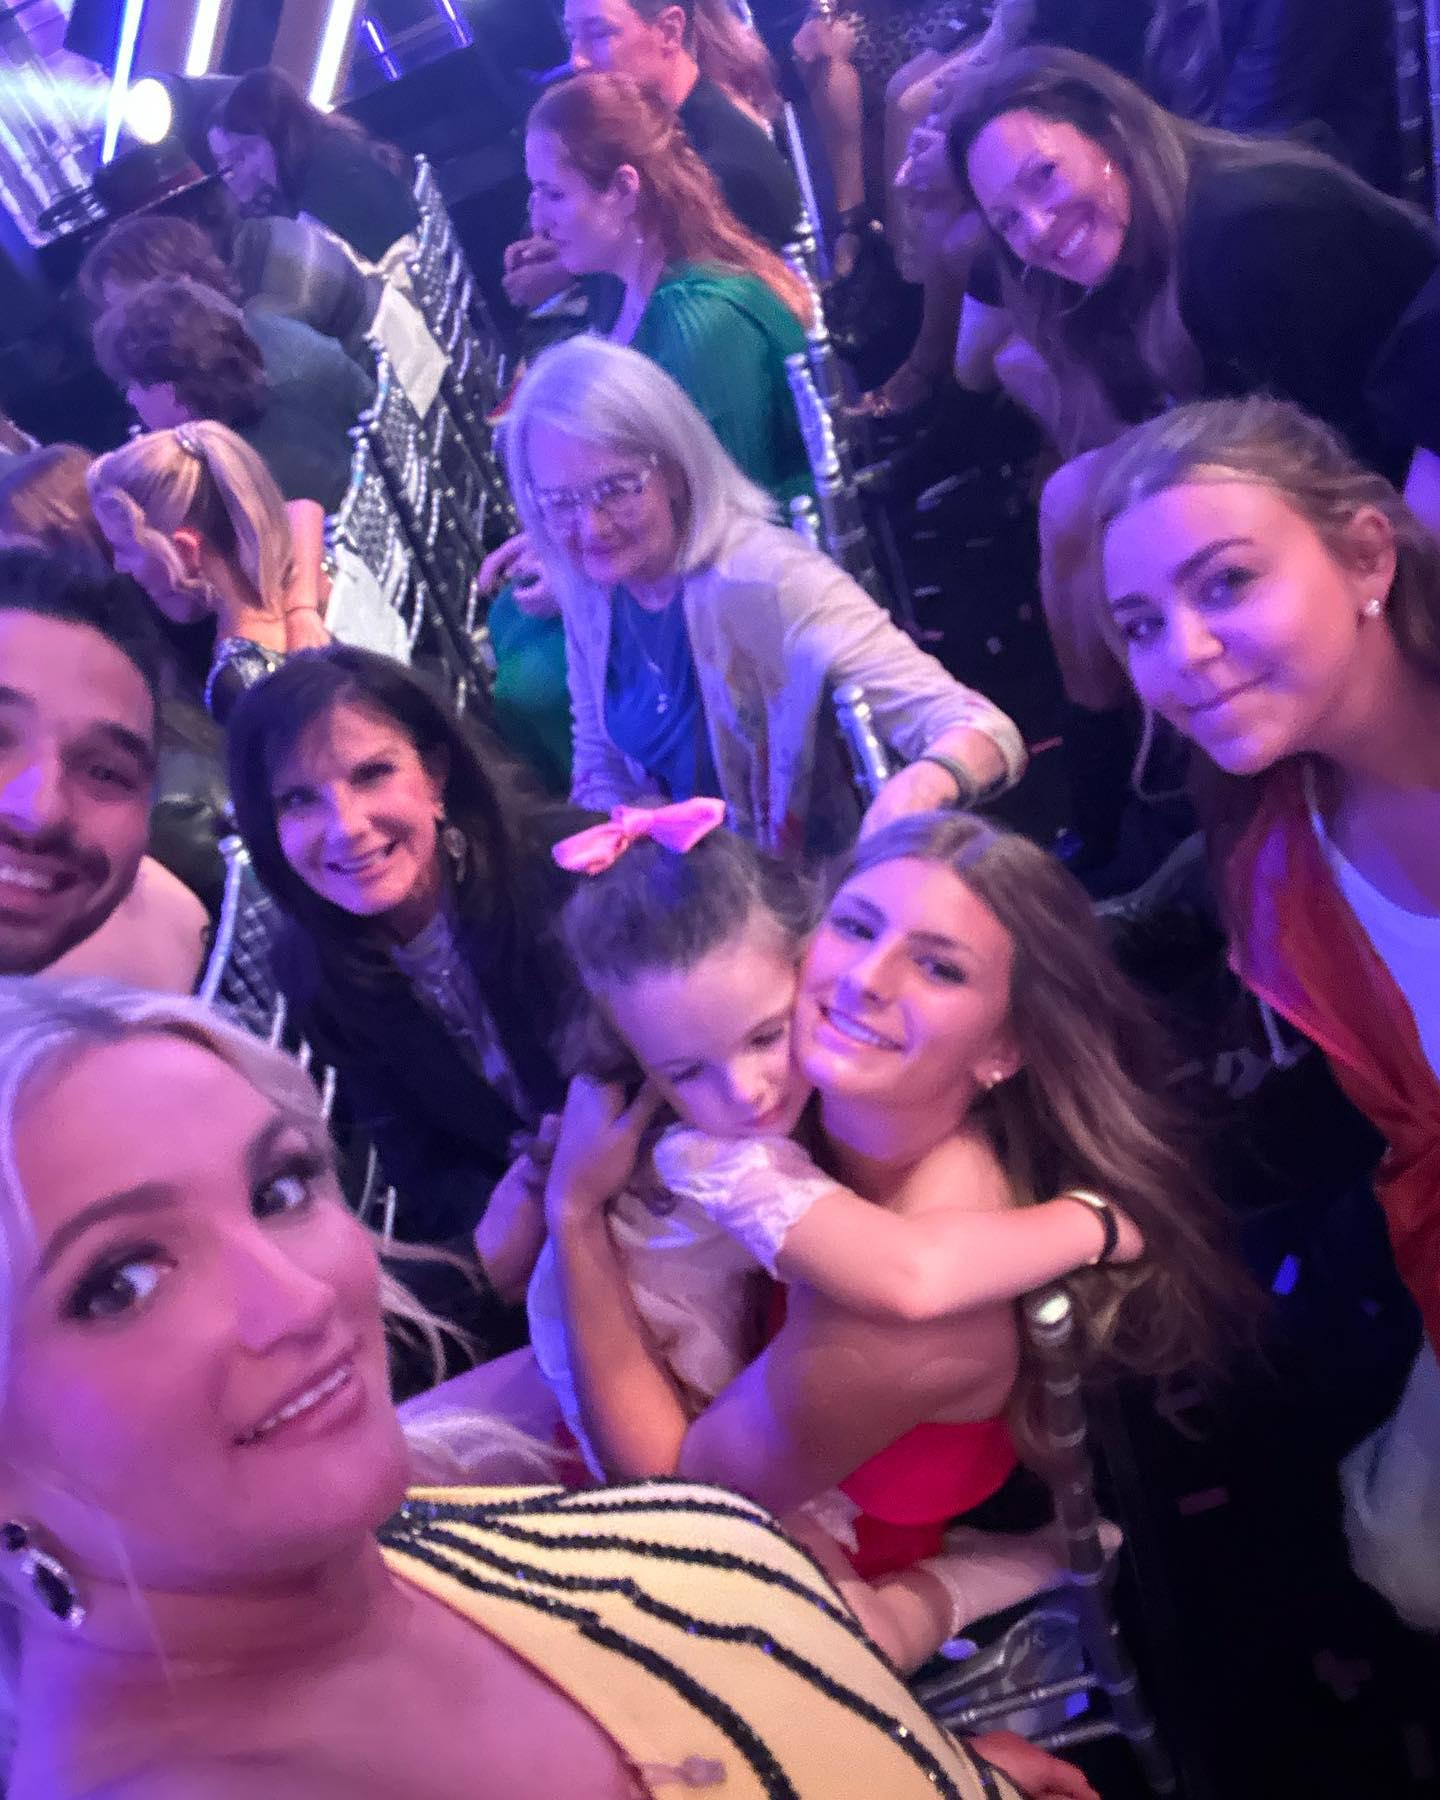 Lynne Spears Gives Jamie Lynn Spears A Leg Massage After ‘DWTS’